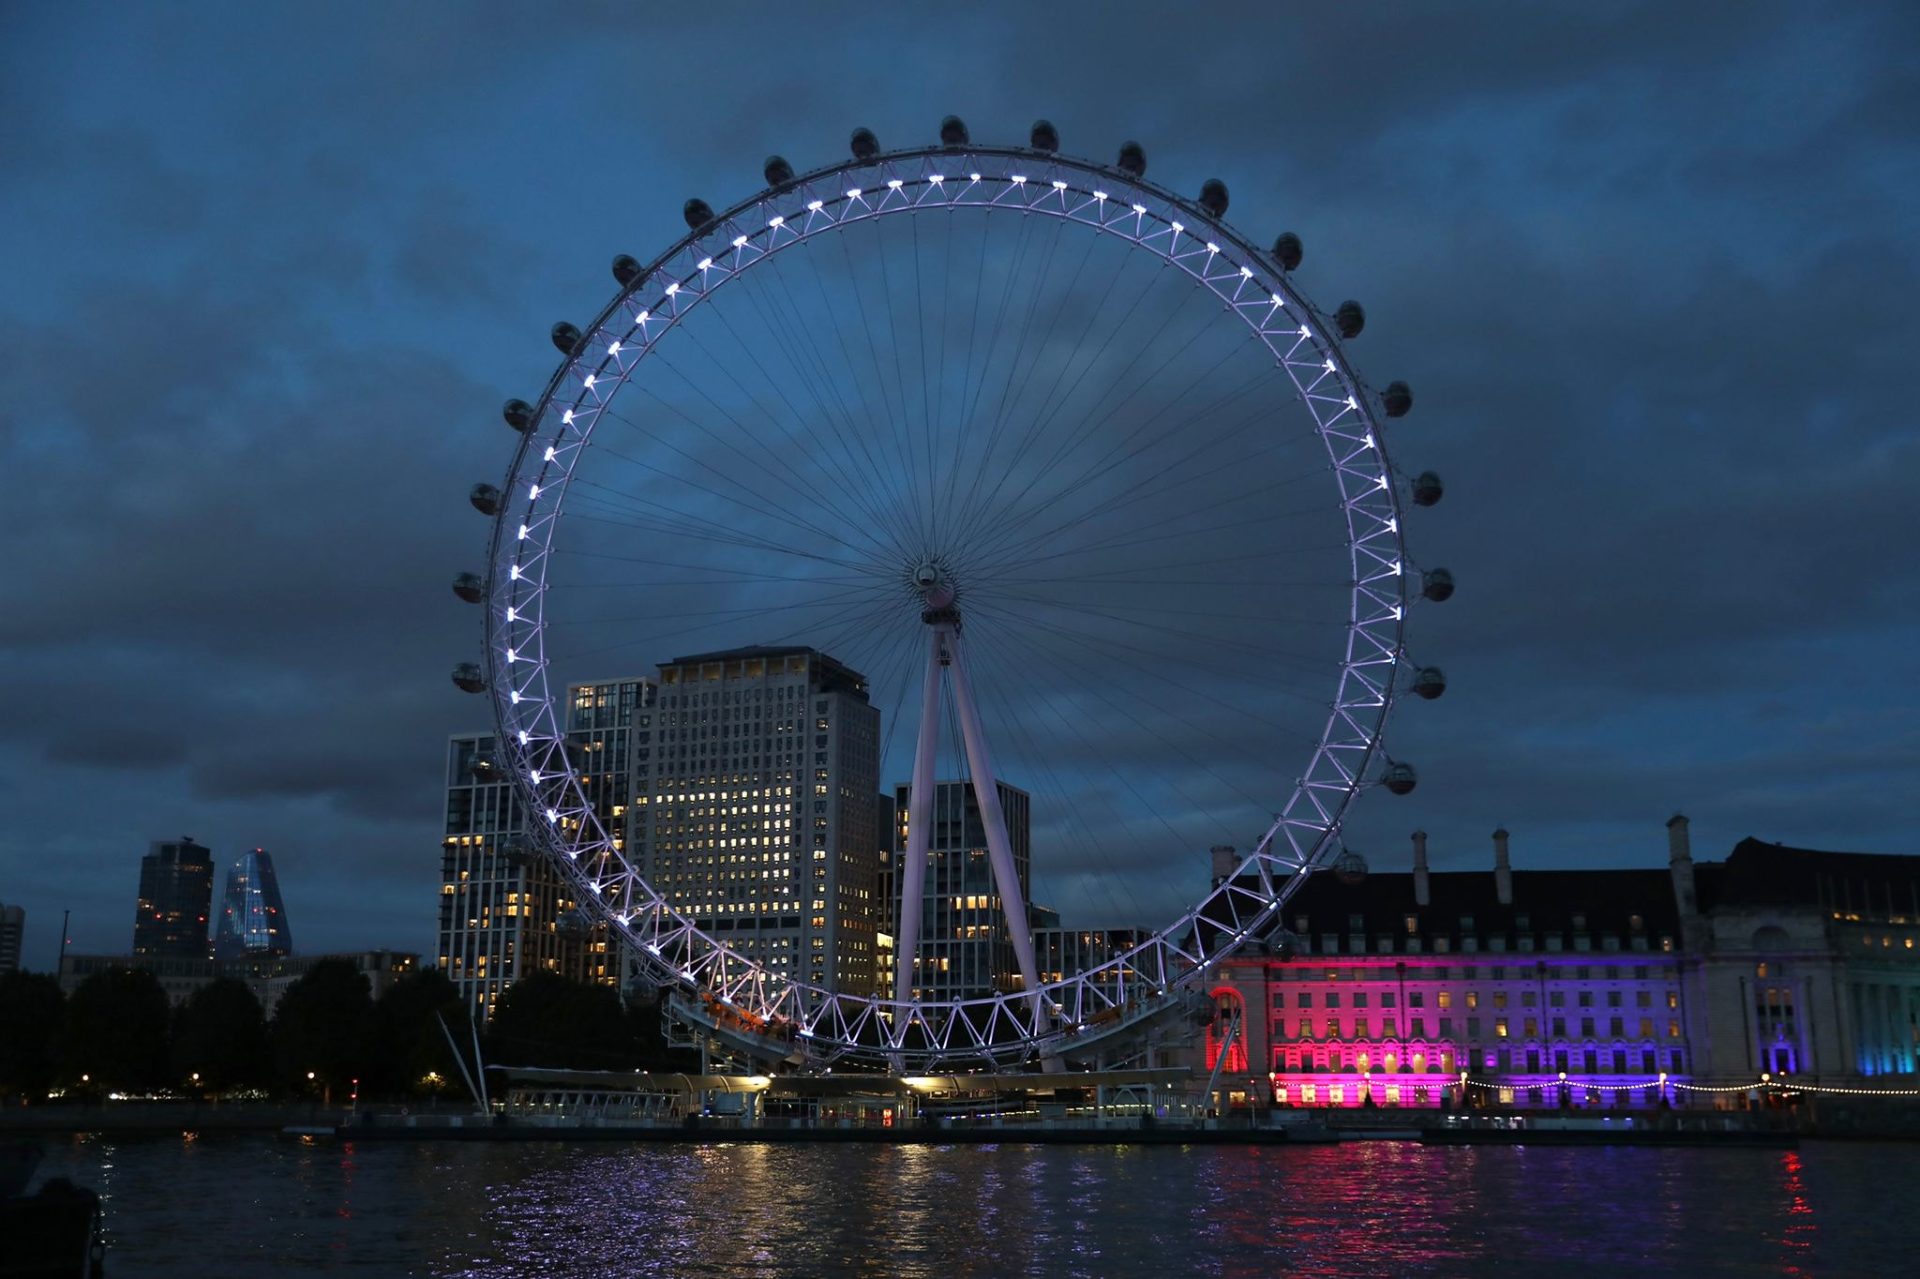 London landmarks across the capital, including the London Eye, have been lit up purple to mark the Elizabeth Line's opening